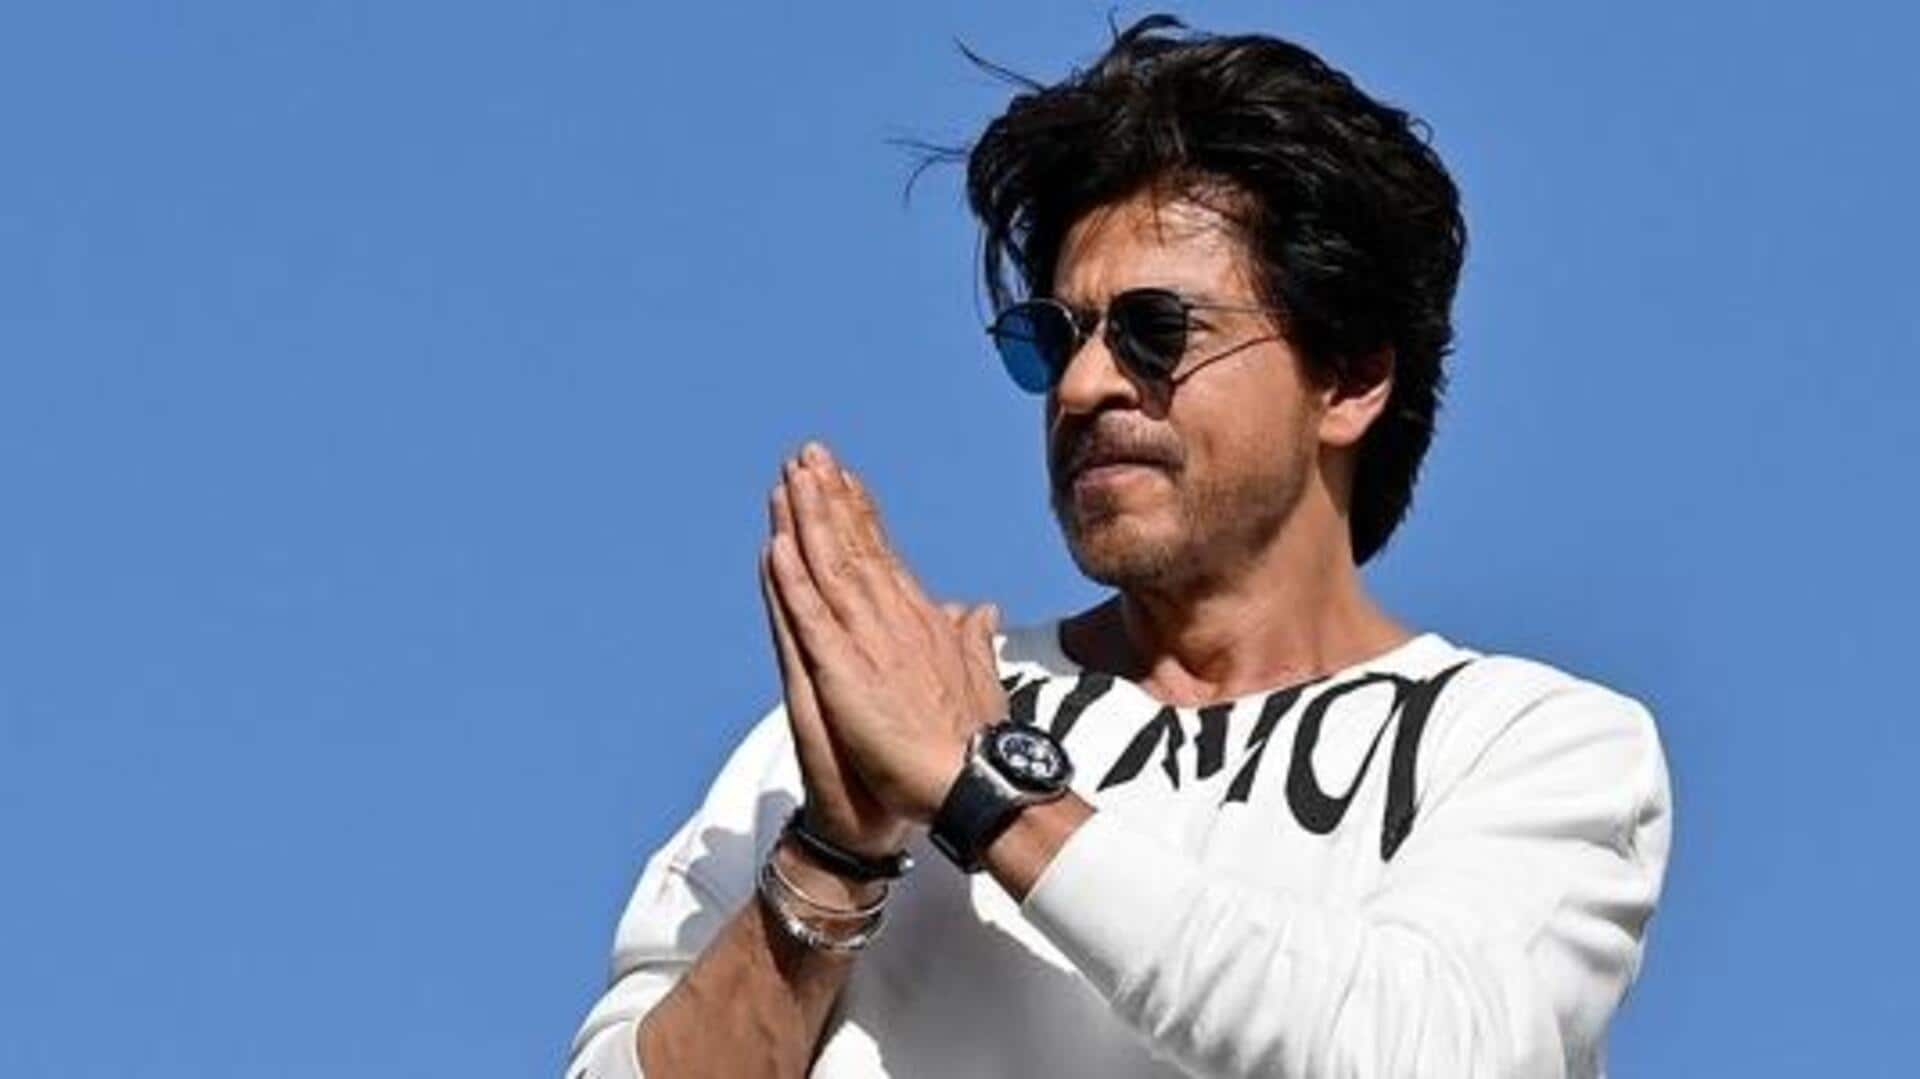 Fan asks SRK to replicate Tom Cruise; here's Khan's answer